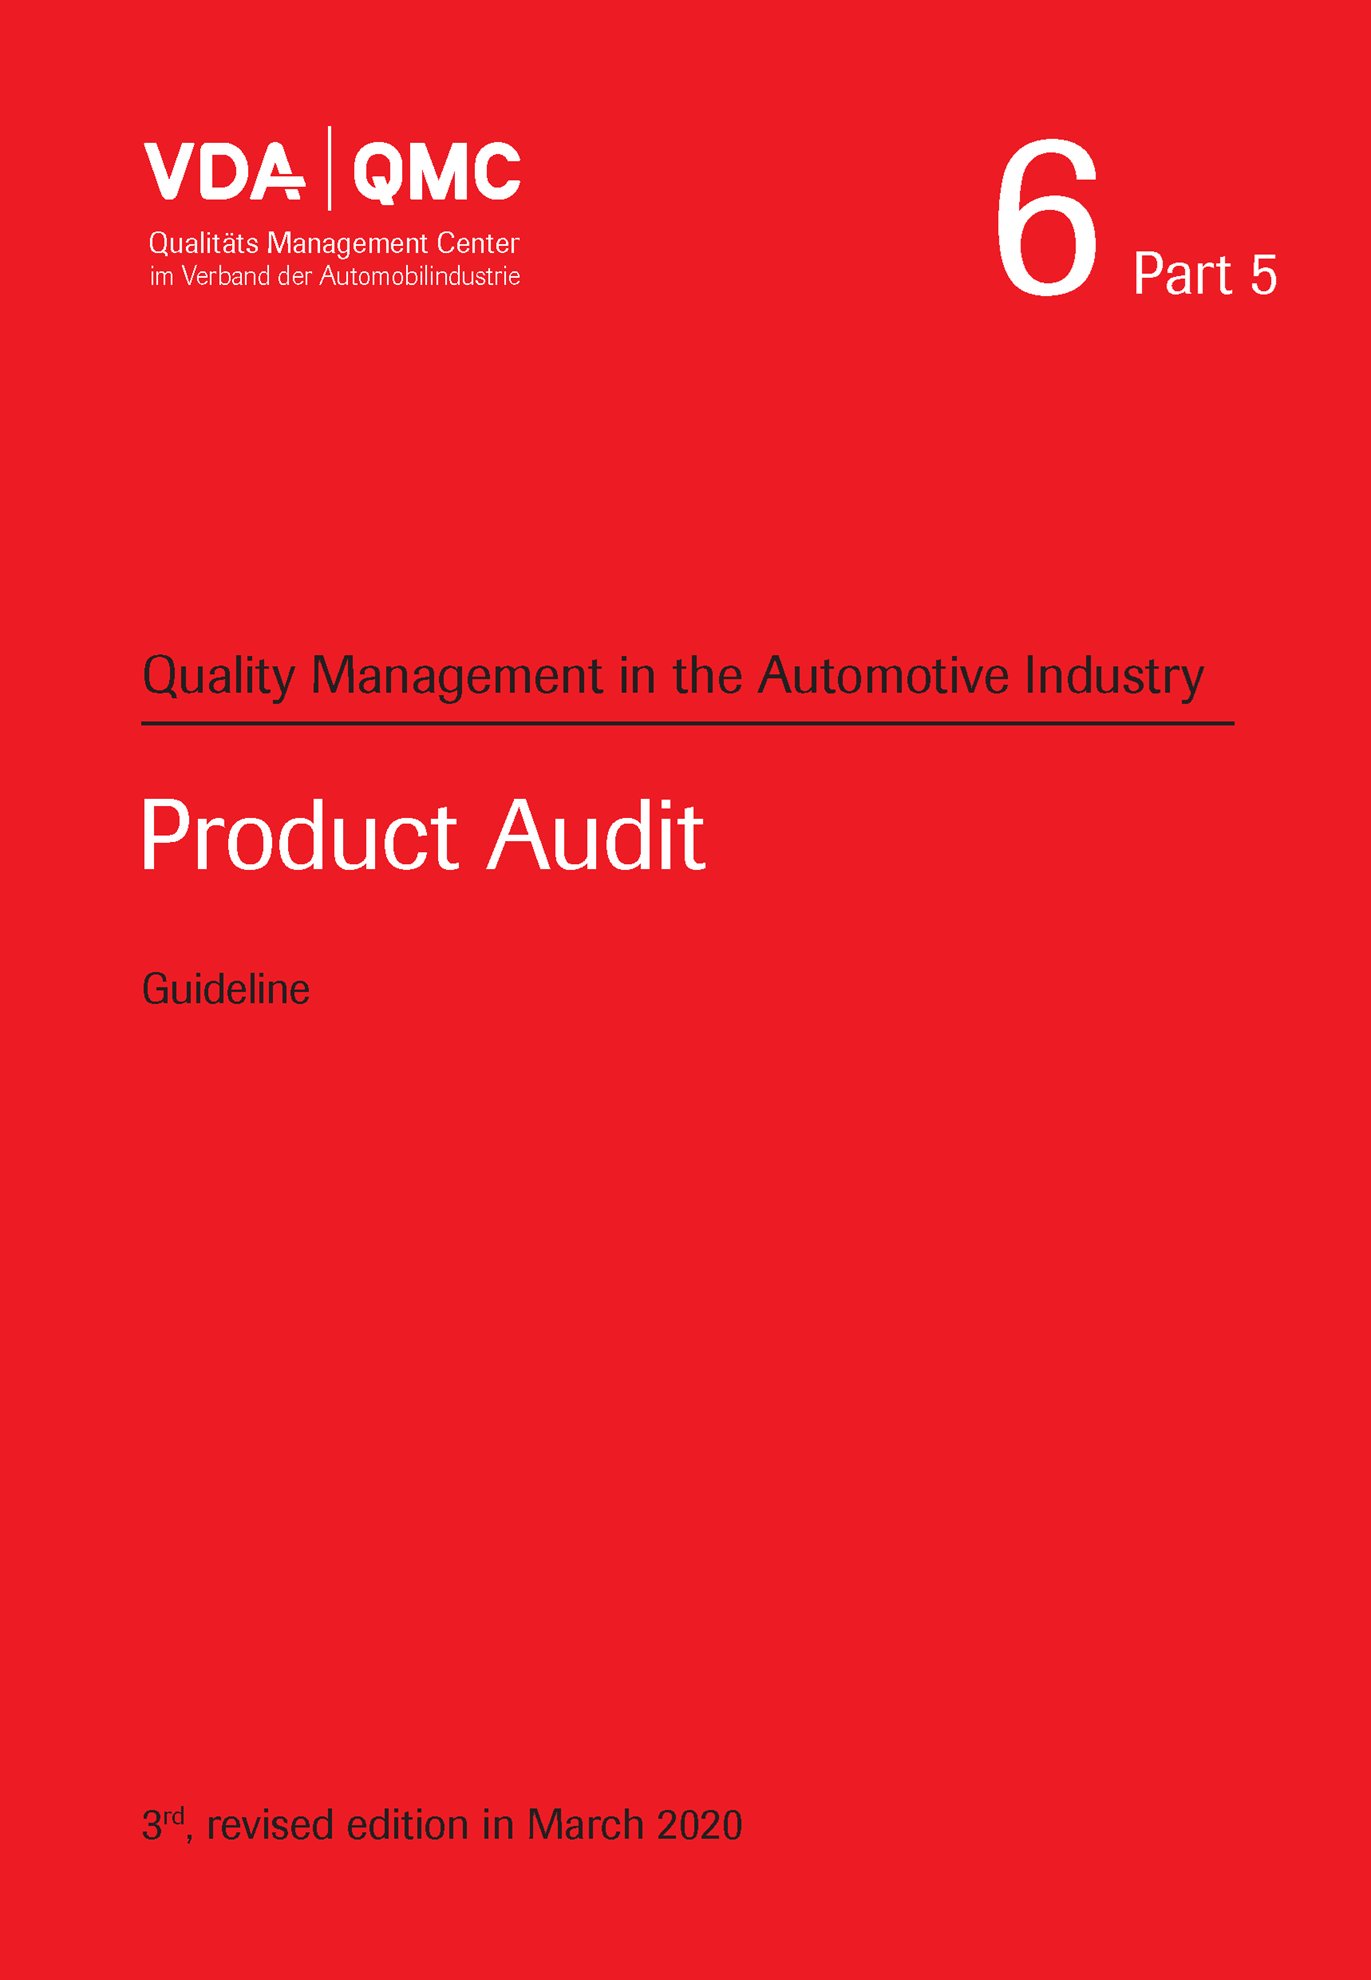 Publikation  VDA Volume 6 Part 5 - Product Audit, 3rd, revised edition, March 2020 1.3.2020 Ansicht